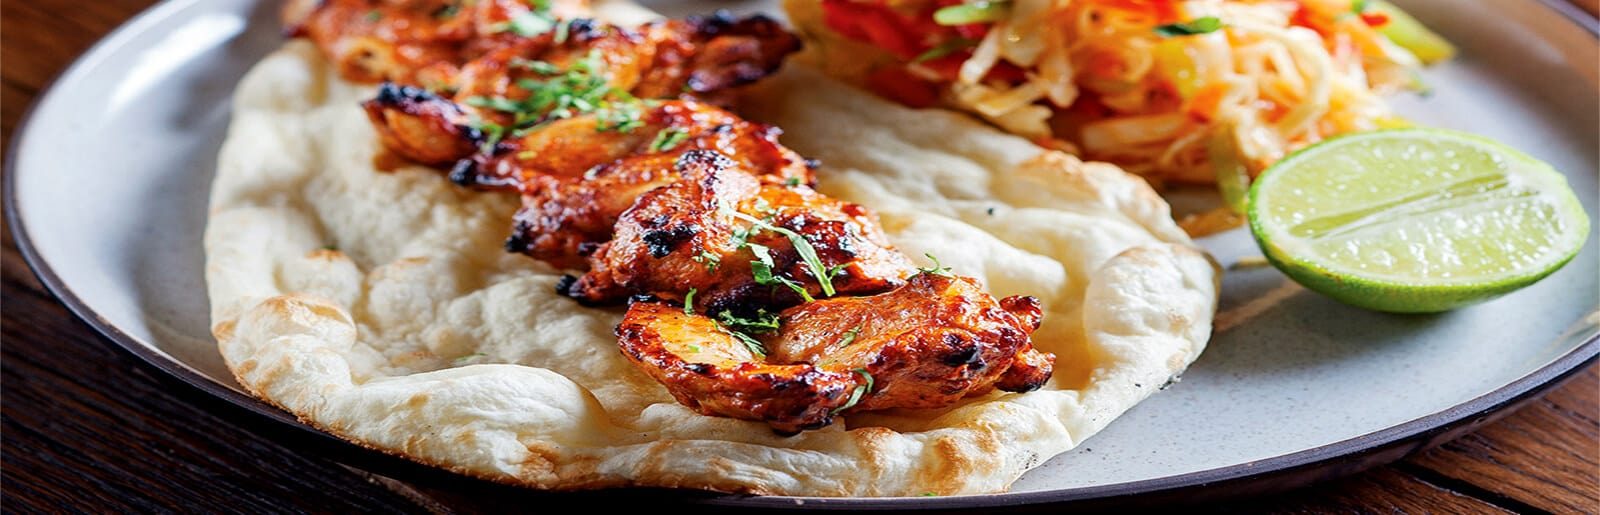 10% off on online collection orders - Grapes Tandoori Indian Restaurant